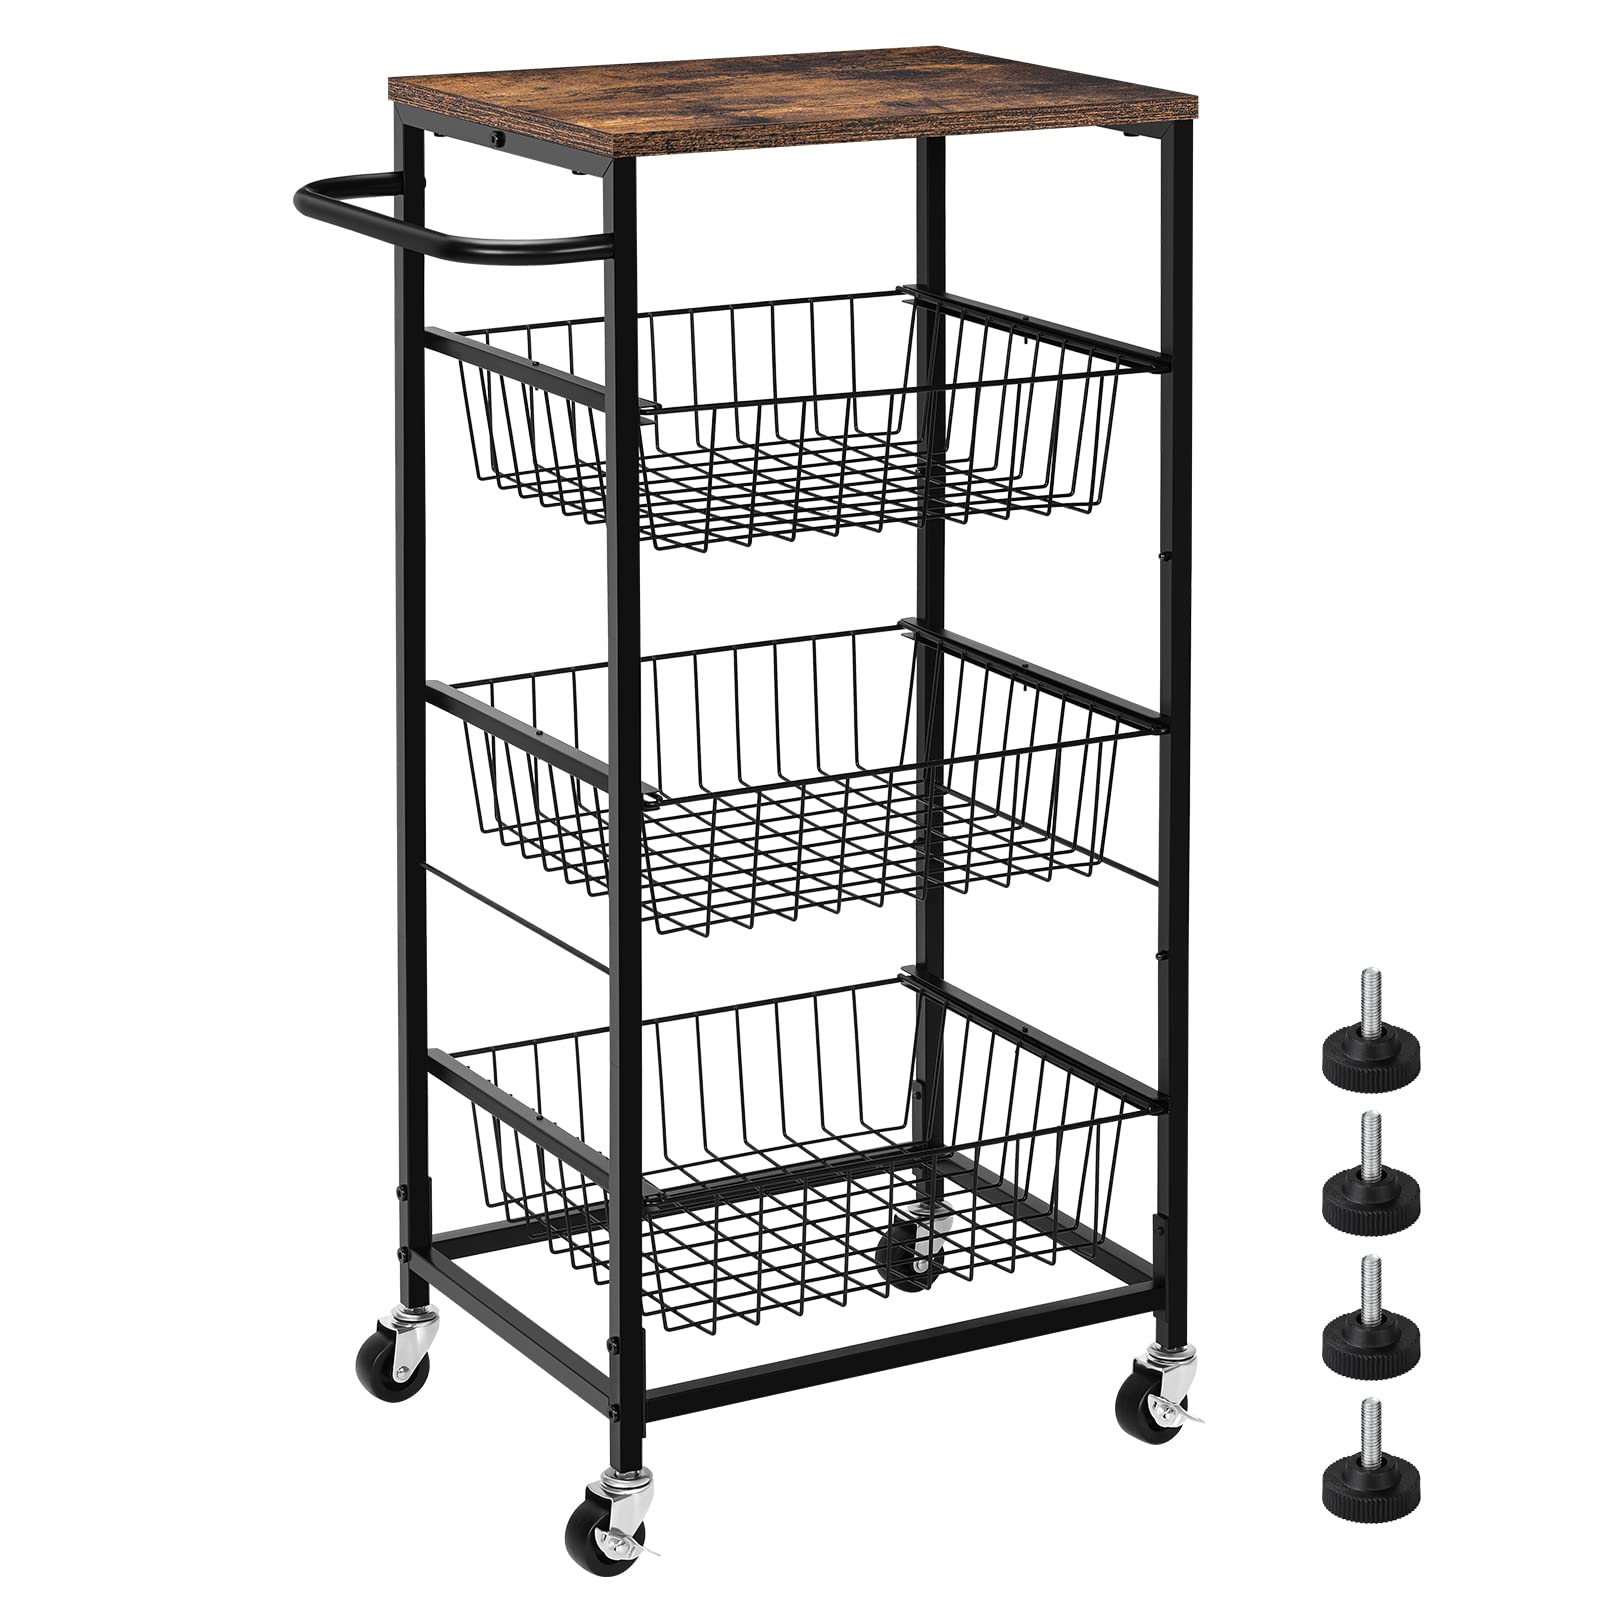 Kitchen Carts on Wheels, Rolling Storage Carts 4 Tier, Utility Service Cart Fruit Storage Baskets Rack for Potato Snack Industrial Island Food Trolley with Handle for Kitchen Bathroom Laundry